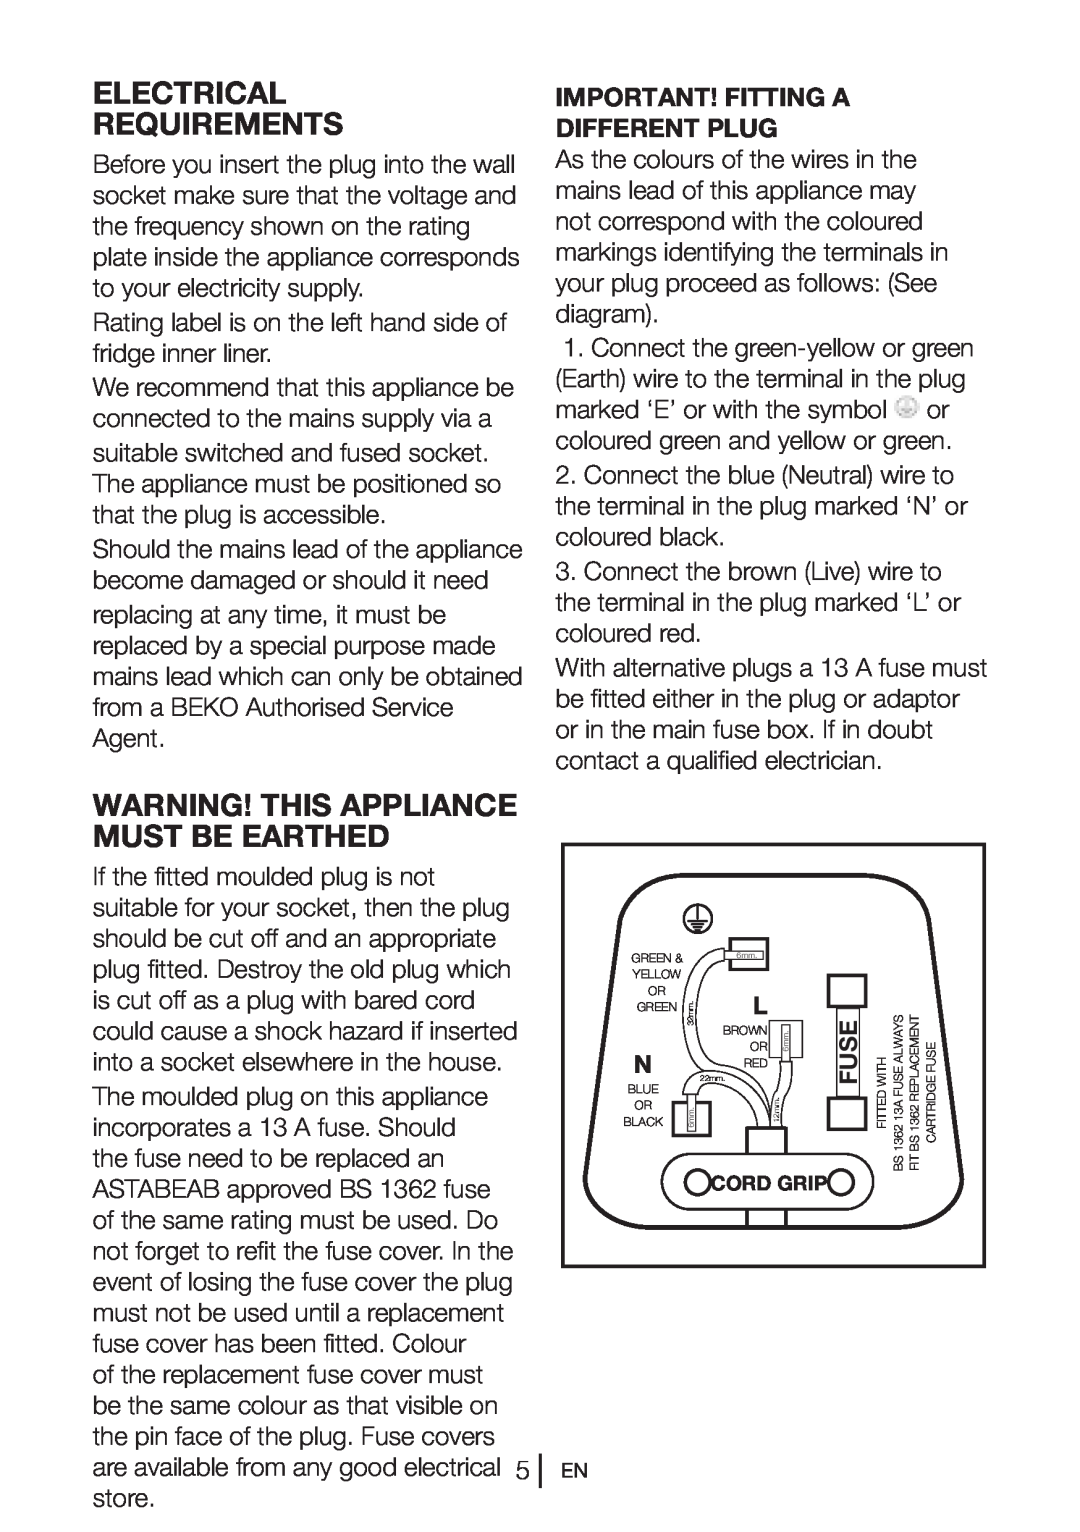 Beko GNE V321APX Electrical Requirements, Warning! This Appliance Must Be Earthed, Important! Fitting A Different Plug 